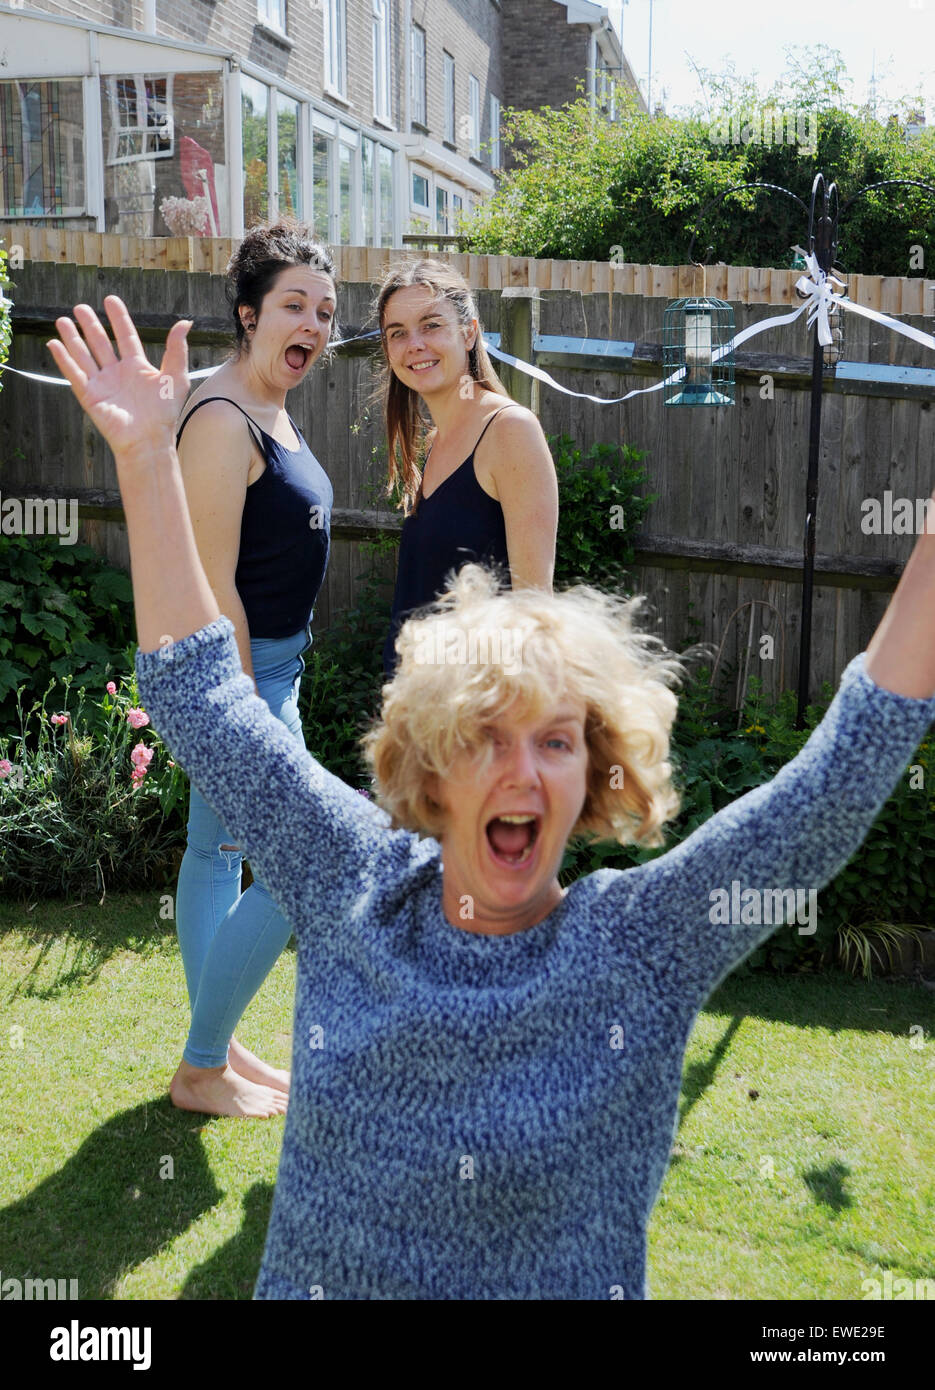 Older Mature Woman Photo Bombs Two Younger Women Having Fun Stock